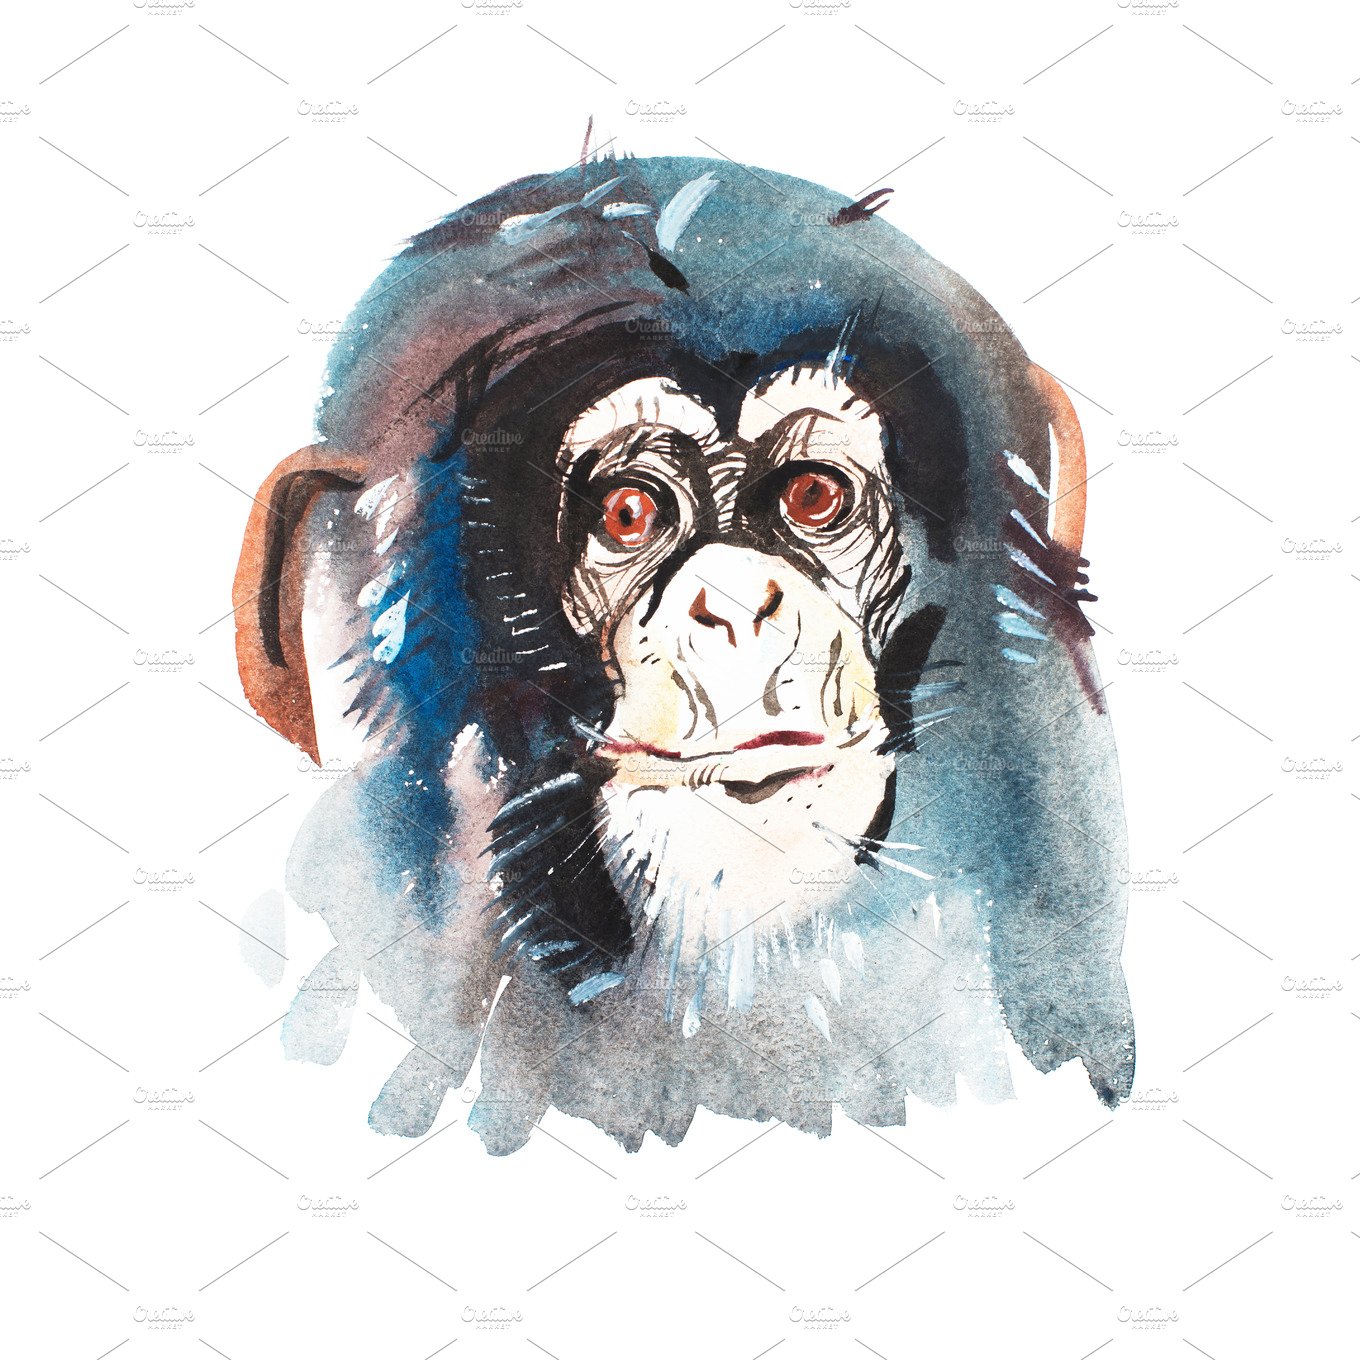 Watercolor portrait of grey furry monkey. Aquarelle drawing 2016 symbol cover image.